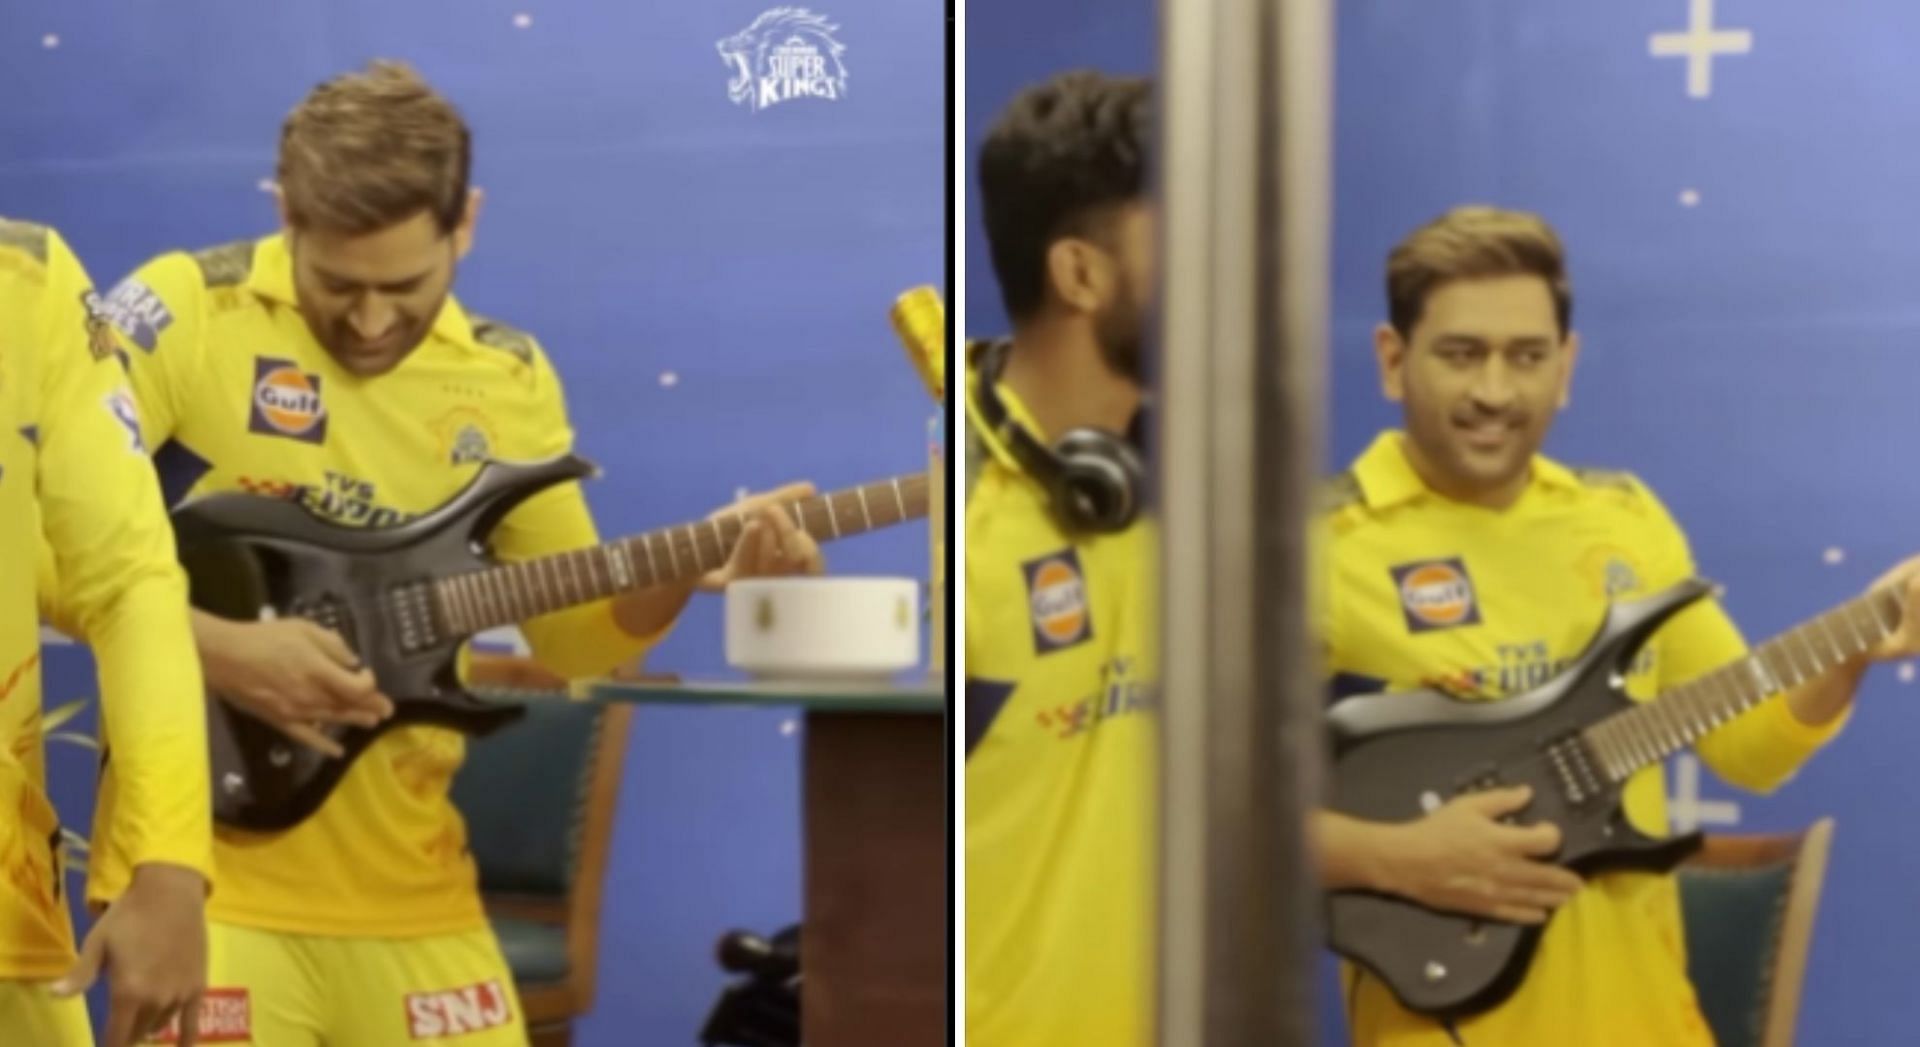 MS Dhoni's 3 most adorable videos from ad shoots